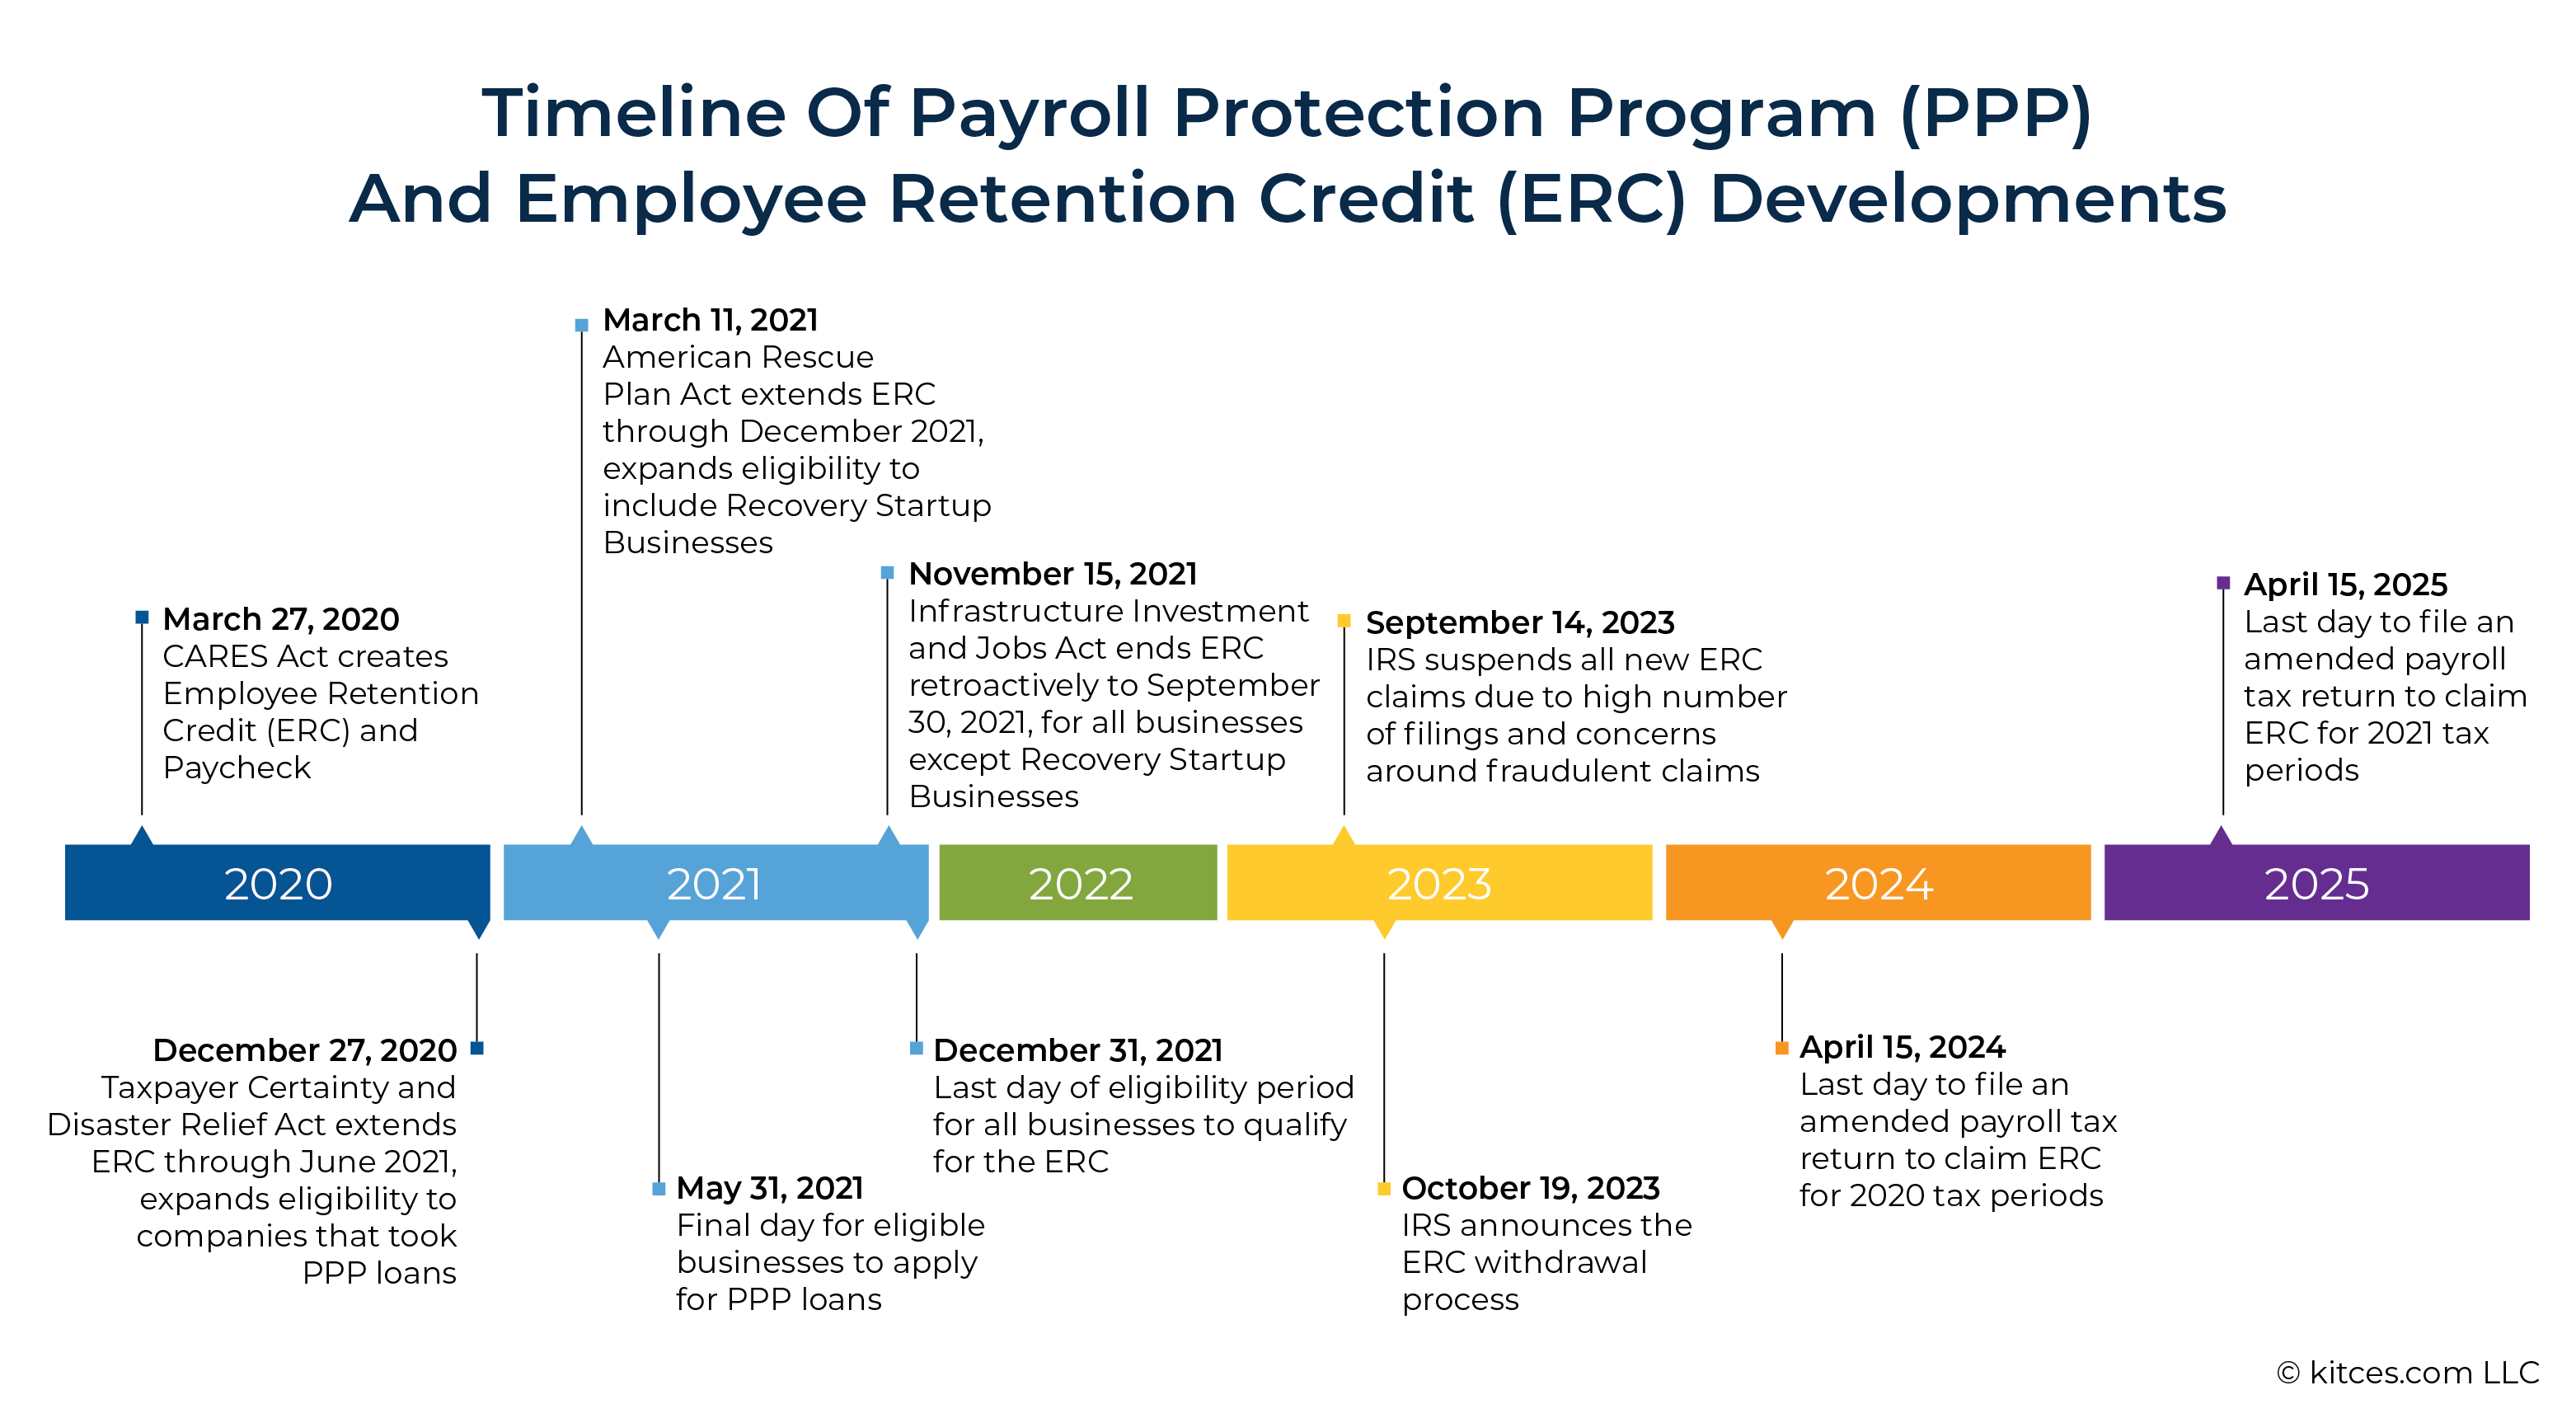 Timeline Of Payroll Protection Program And Employee Retention Credit